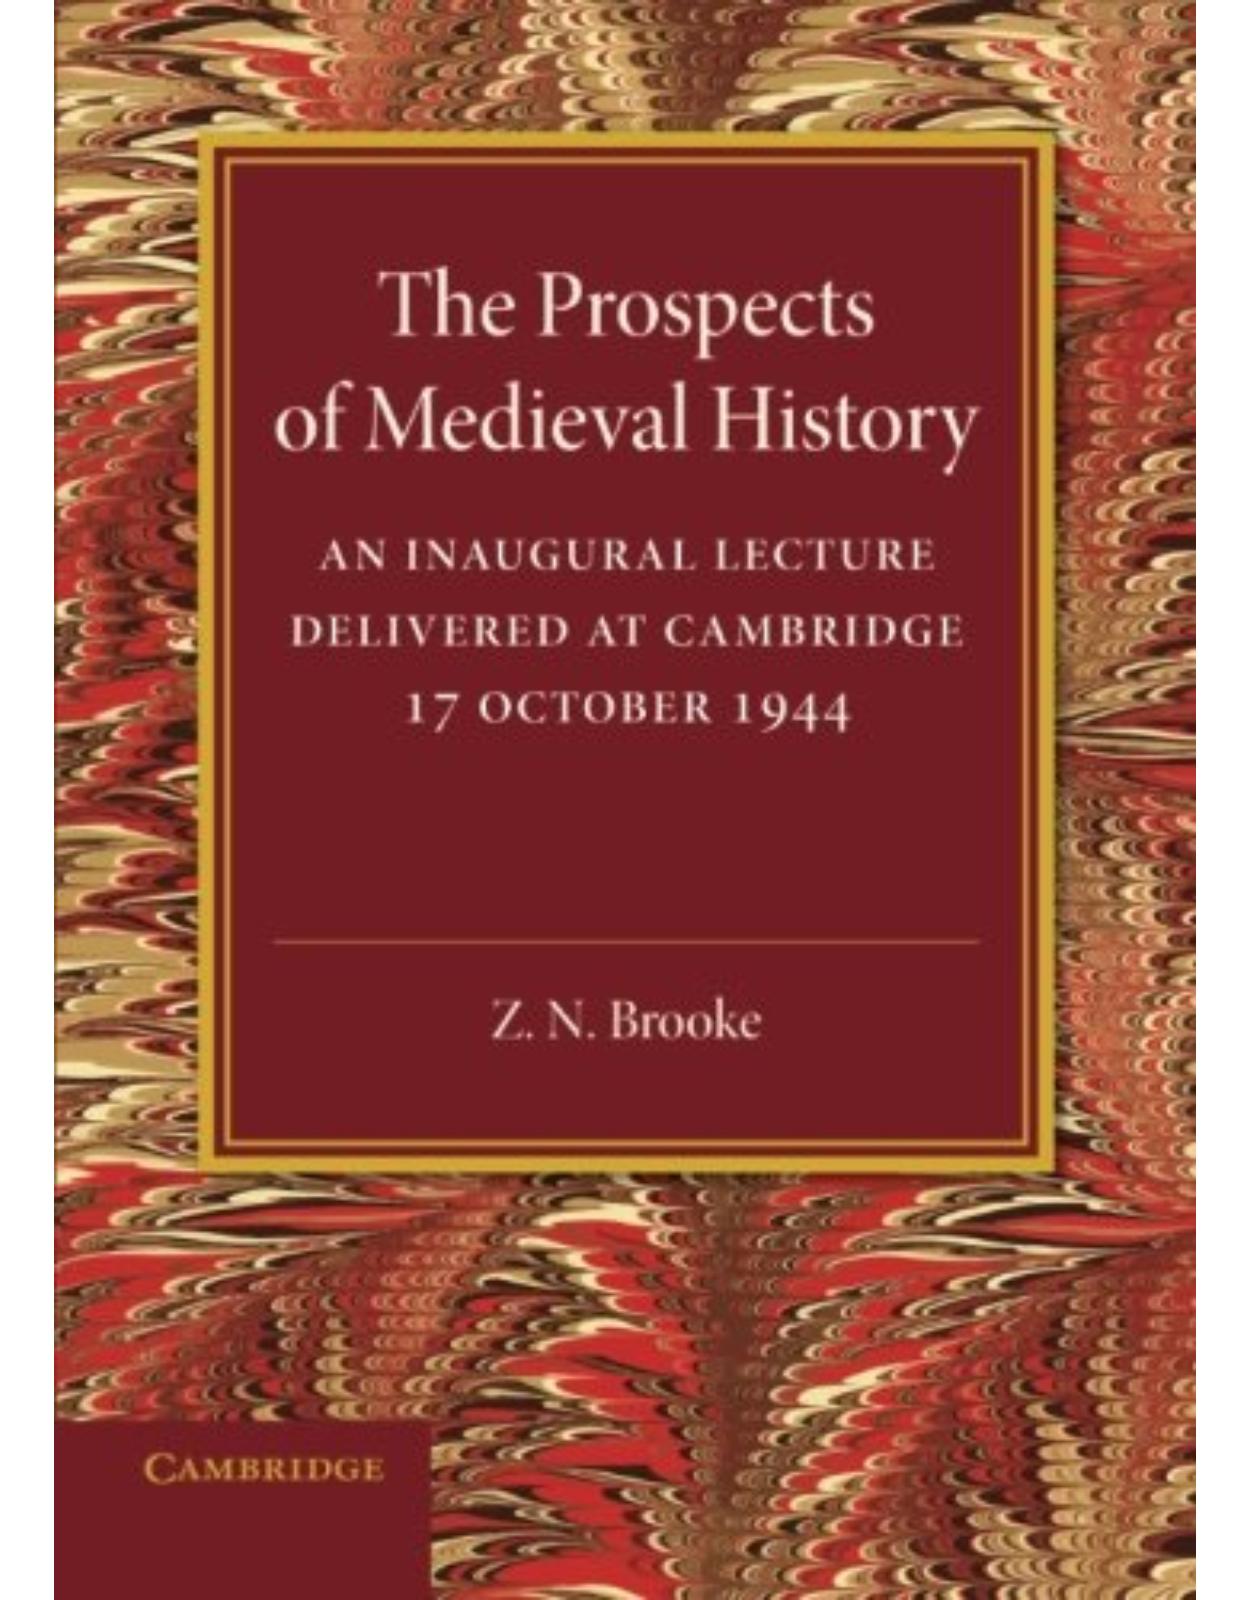 The Prospects of Medieval History: An Inaugural Lecture Delivered at Cambridge, 17 October 1944